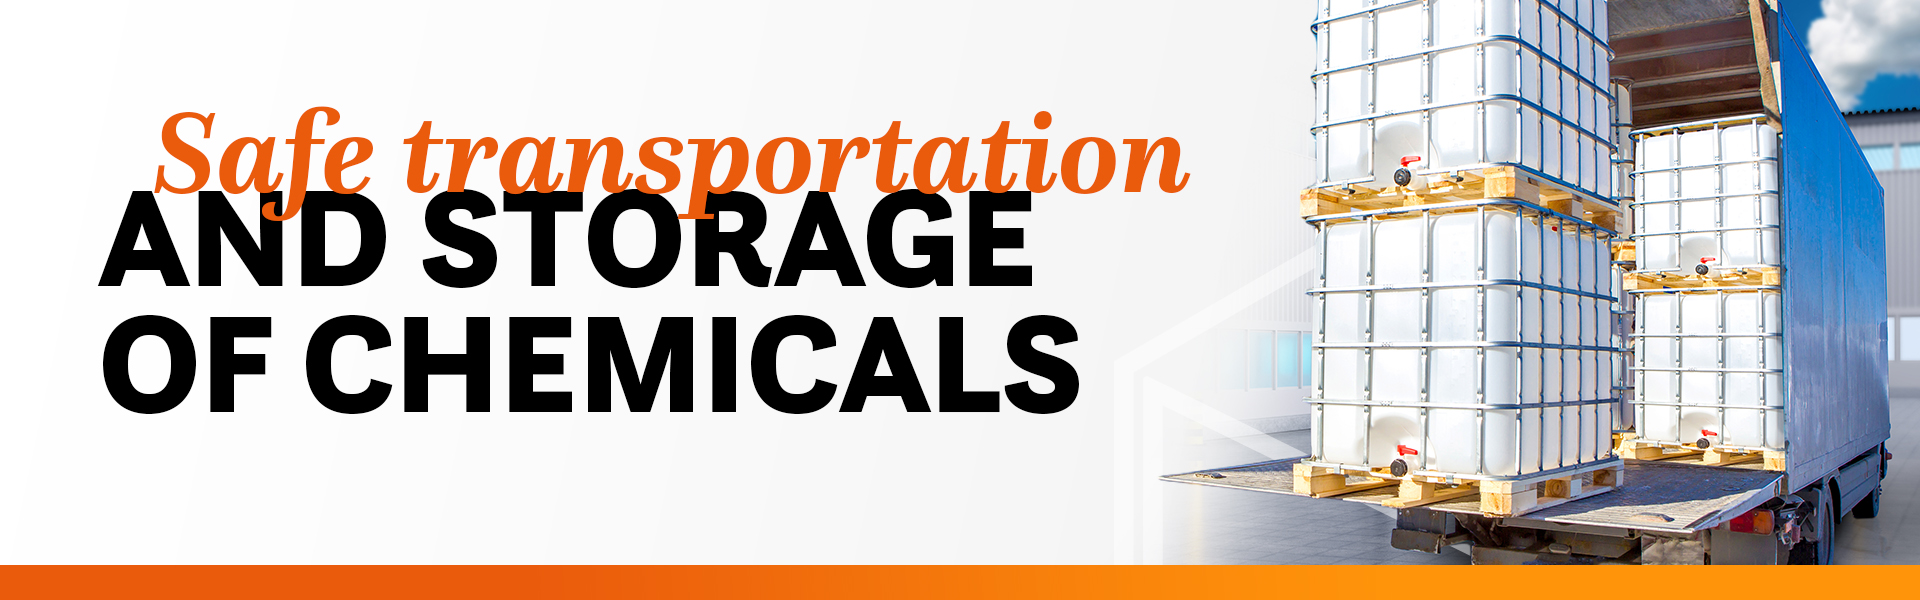 safe transportation and storage of chemicals - guide